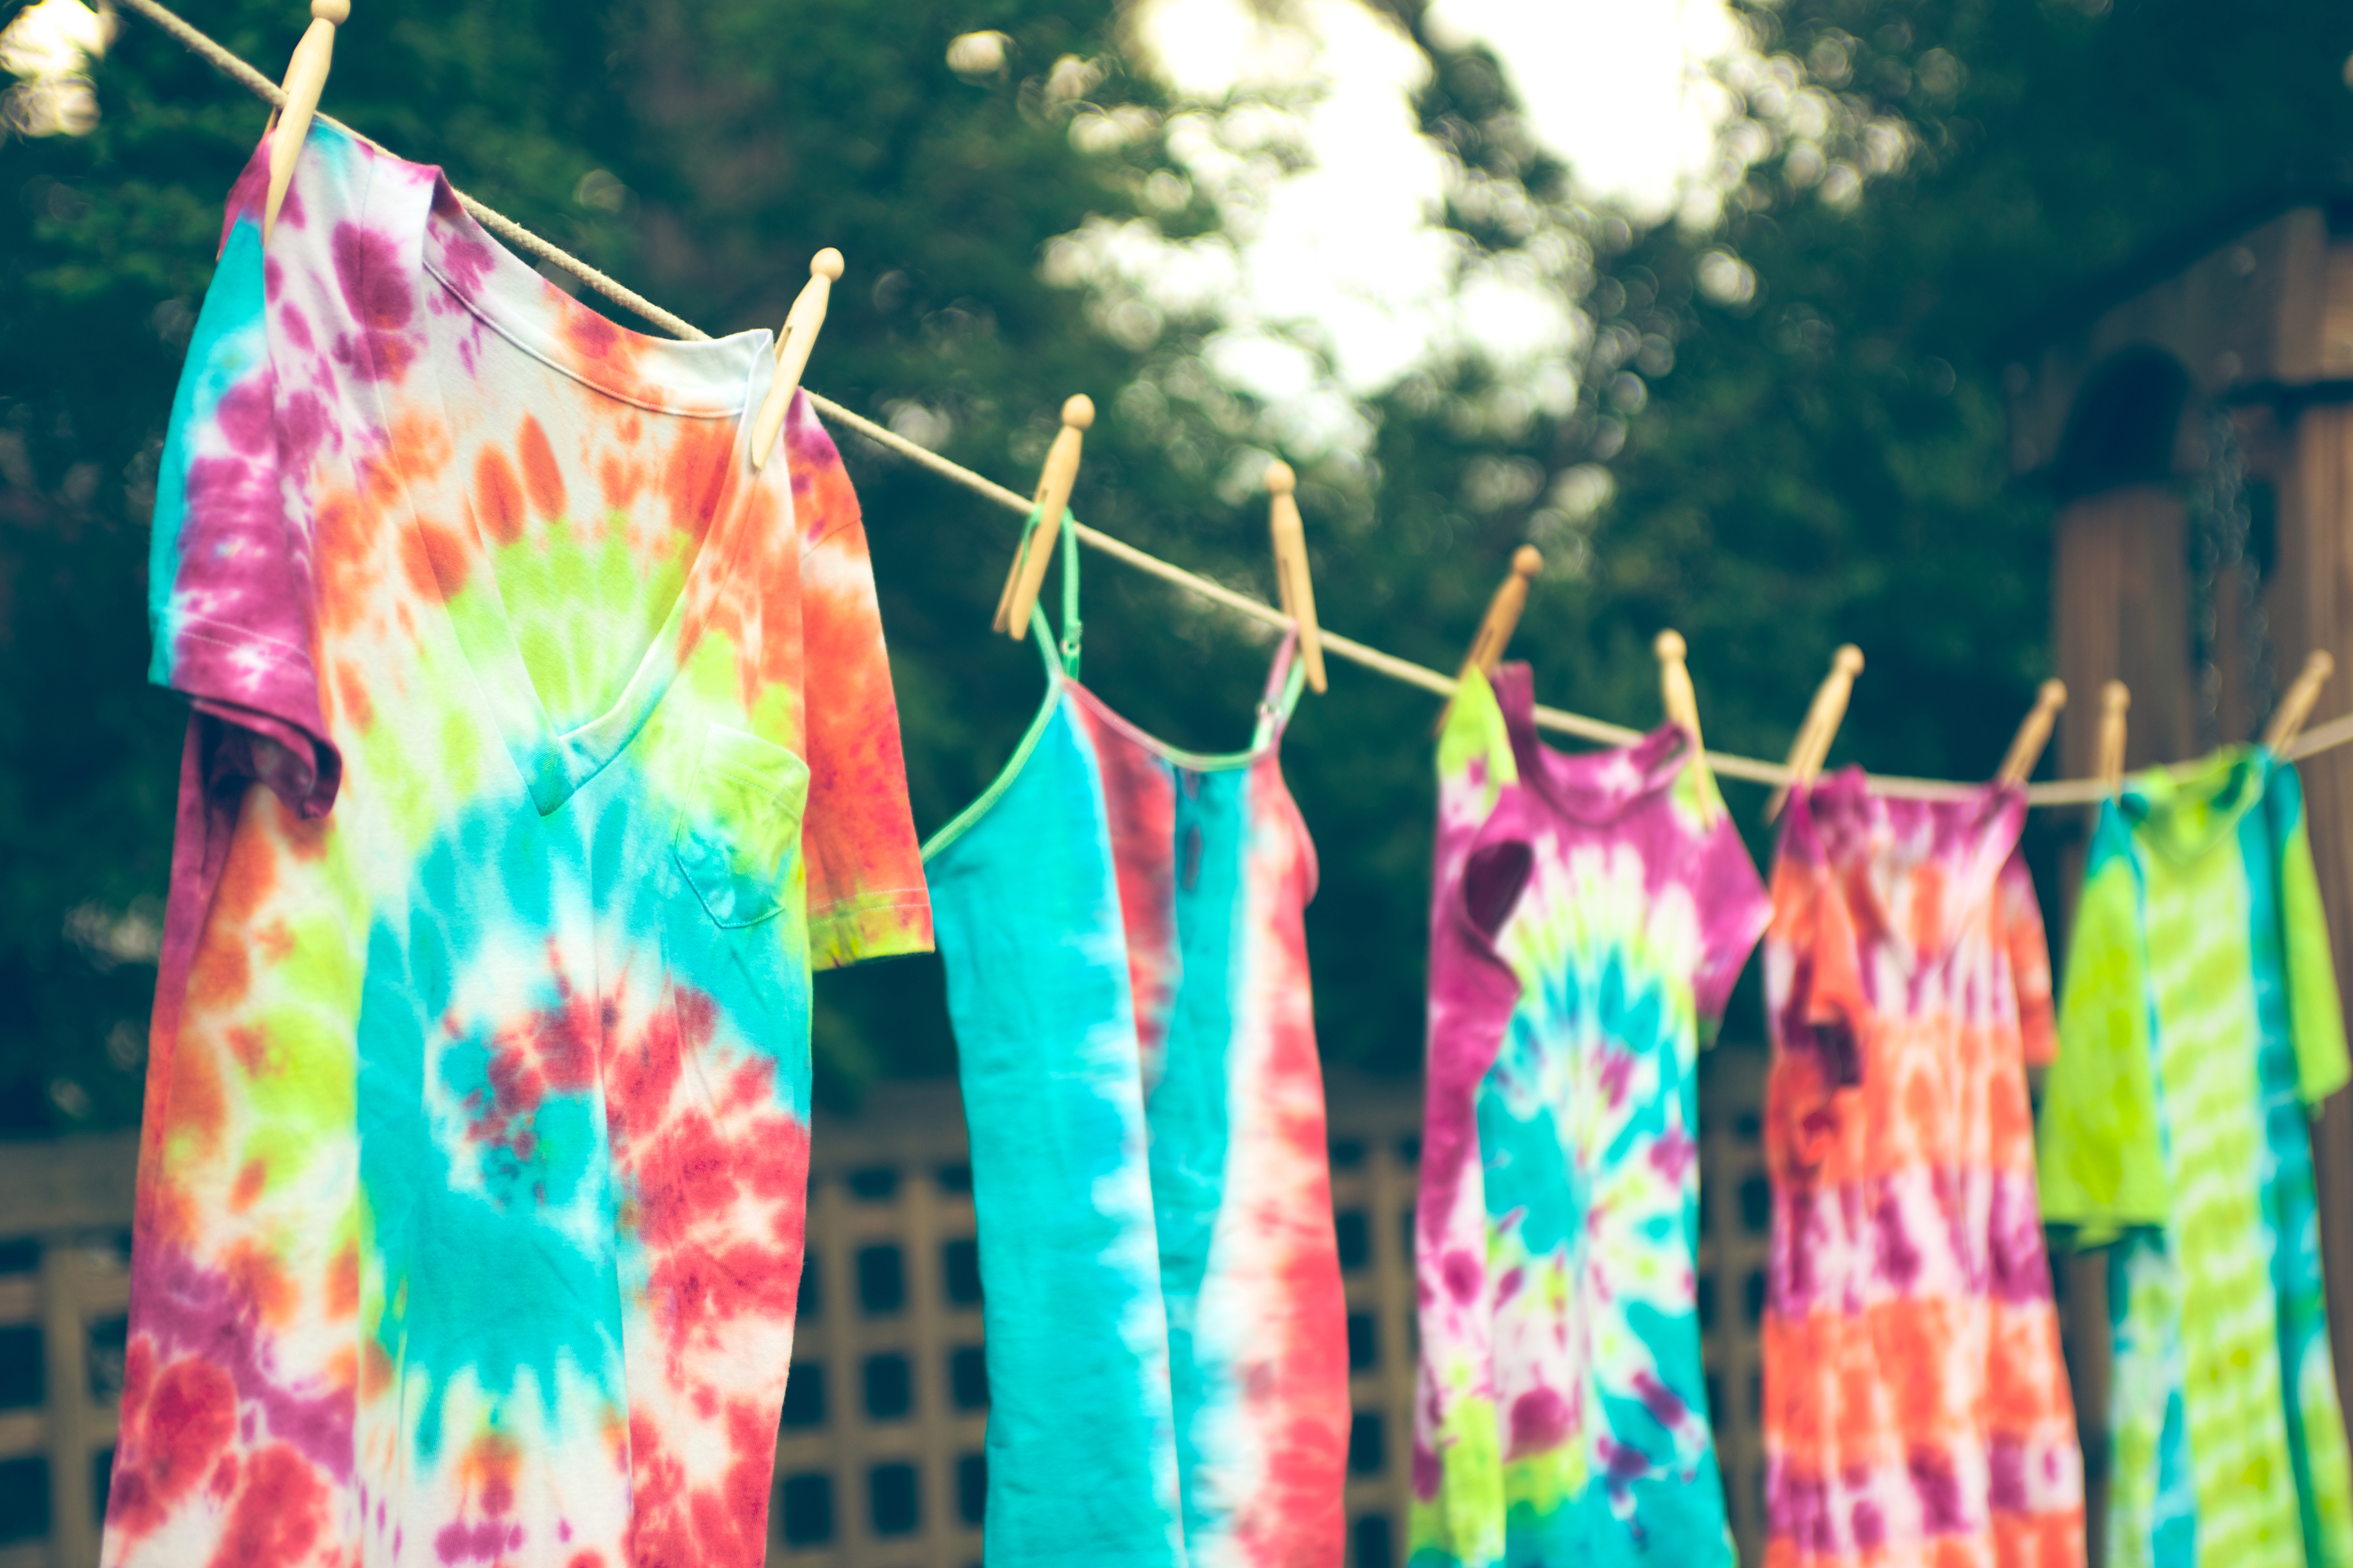 Five tie-dye shirts hanging on a line, indicative of past fashion trends